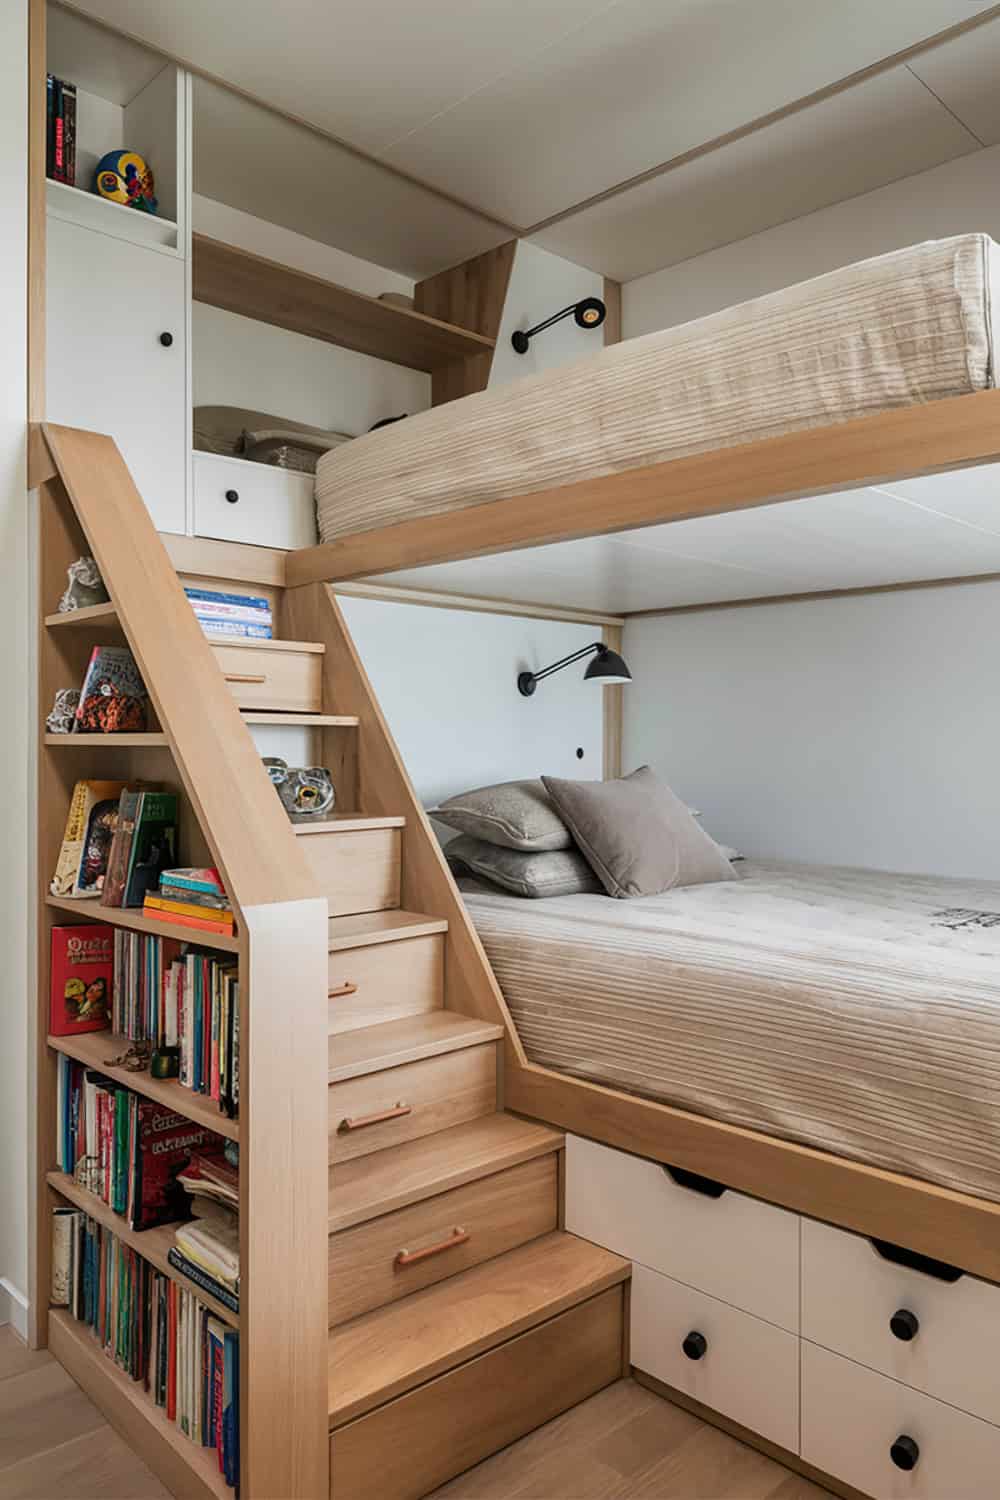 Bunk Beds with Storage Drawers and Shelves